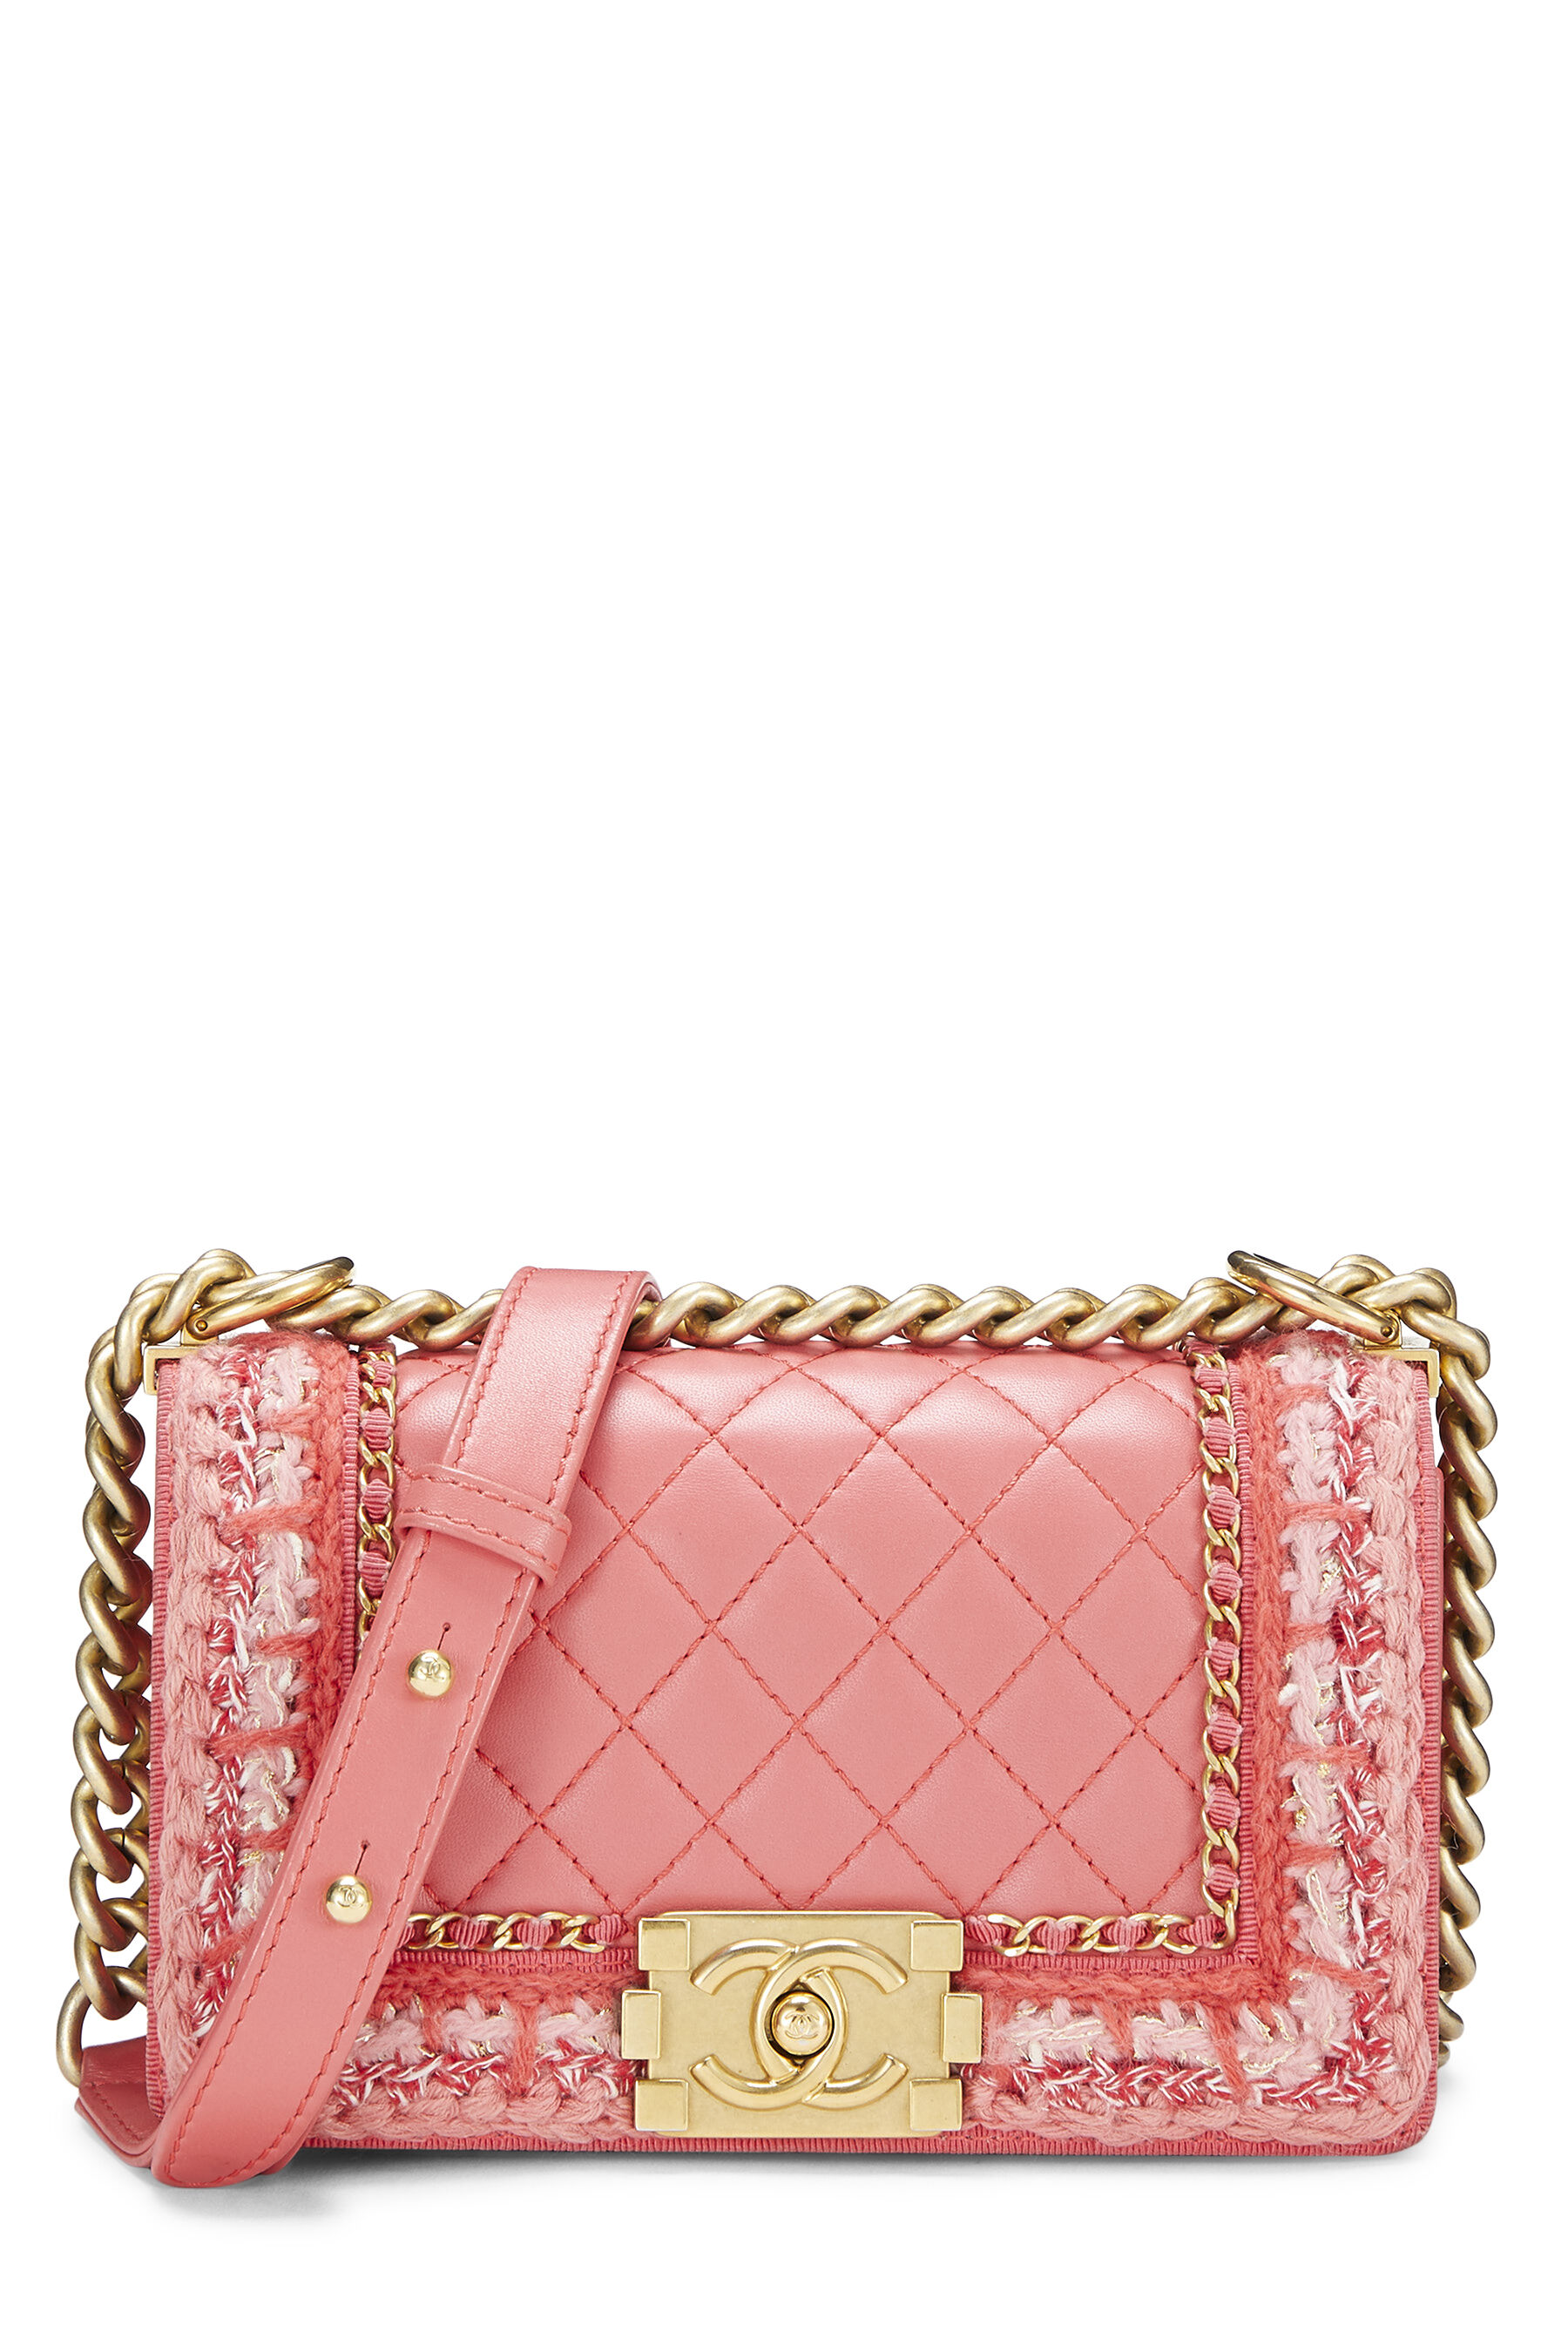 Chanel Boy Flap Quilted Large Stitch Lambskin Ruthenium Small Dusty Rose in  Lambskin with Ruthenium - US